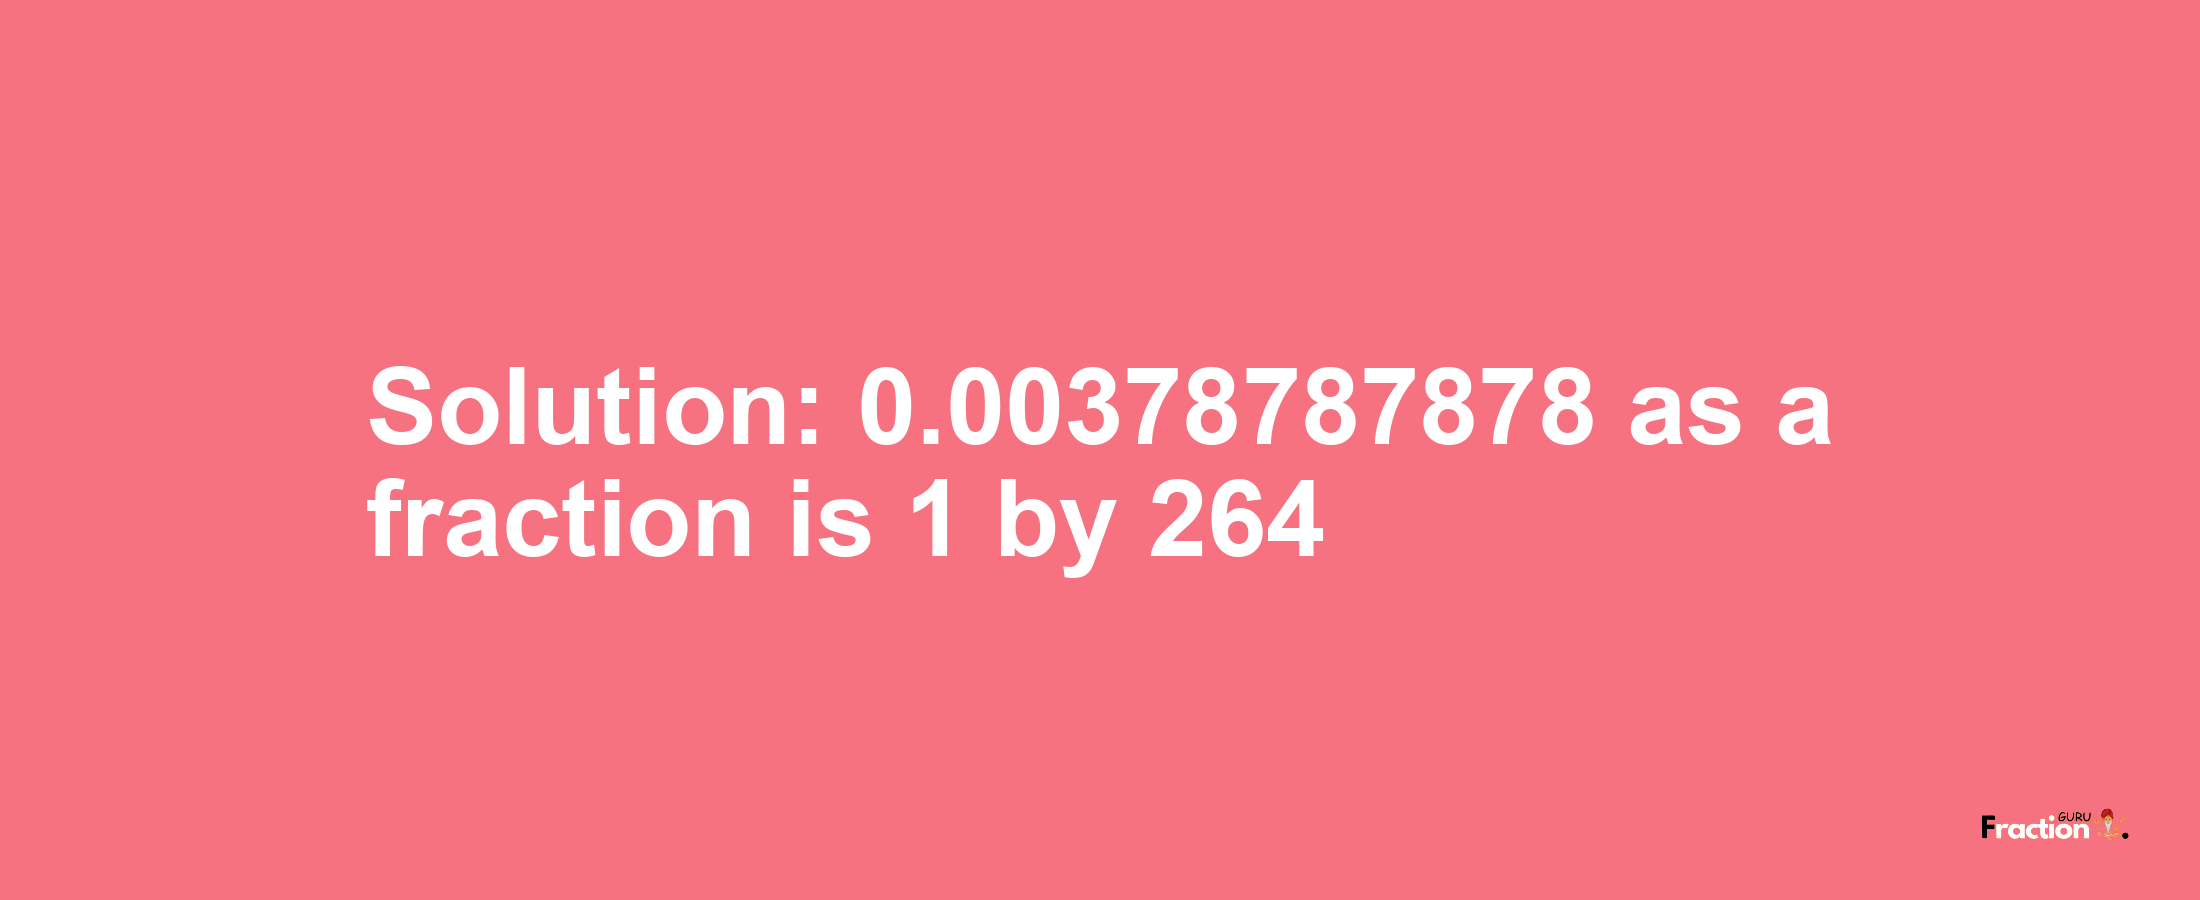 Solution:0.00378787878 as a fraction is 1/264